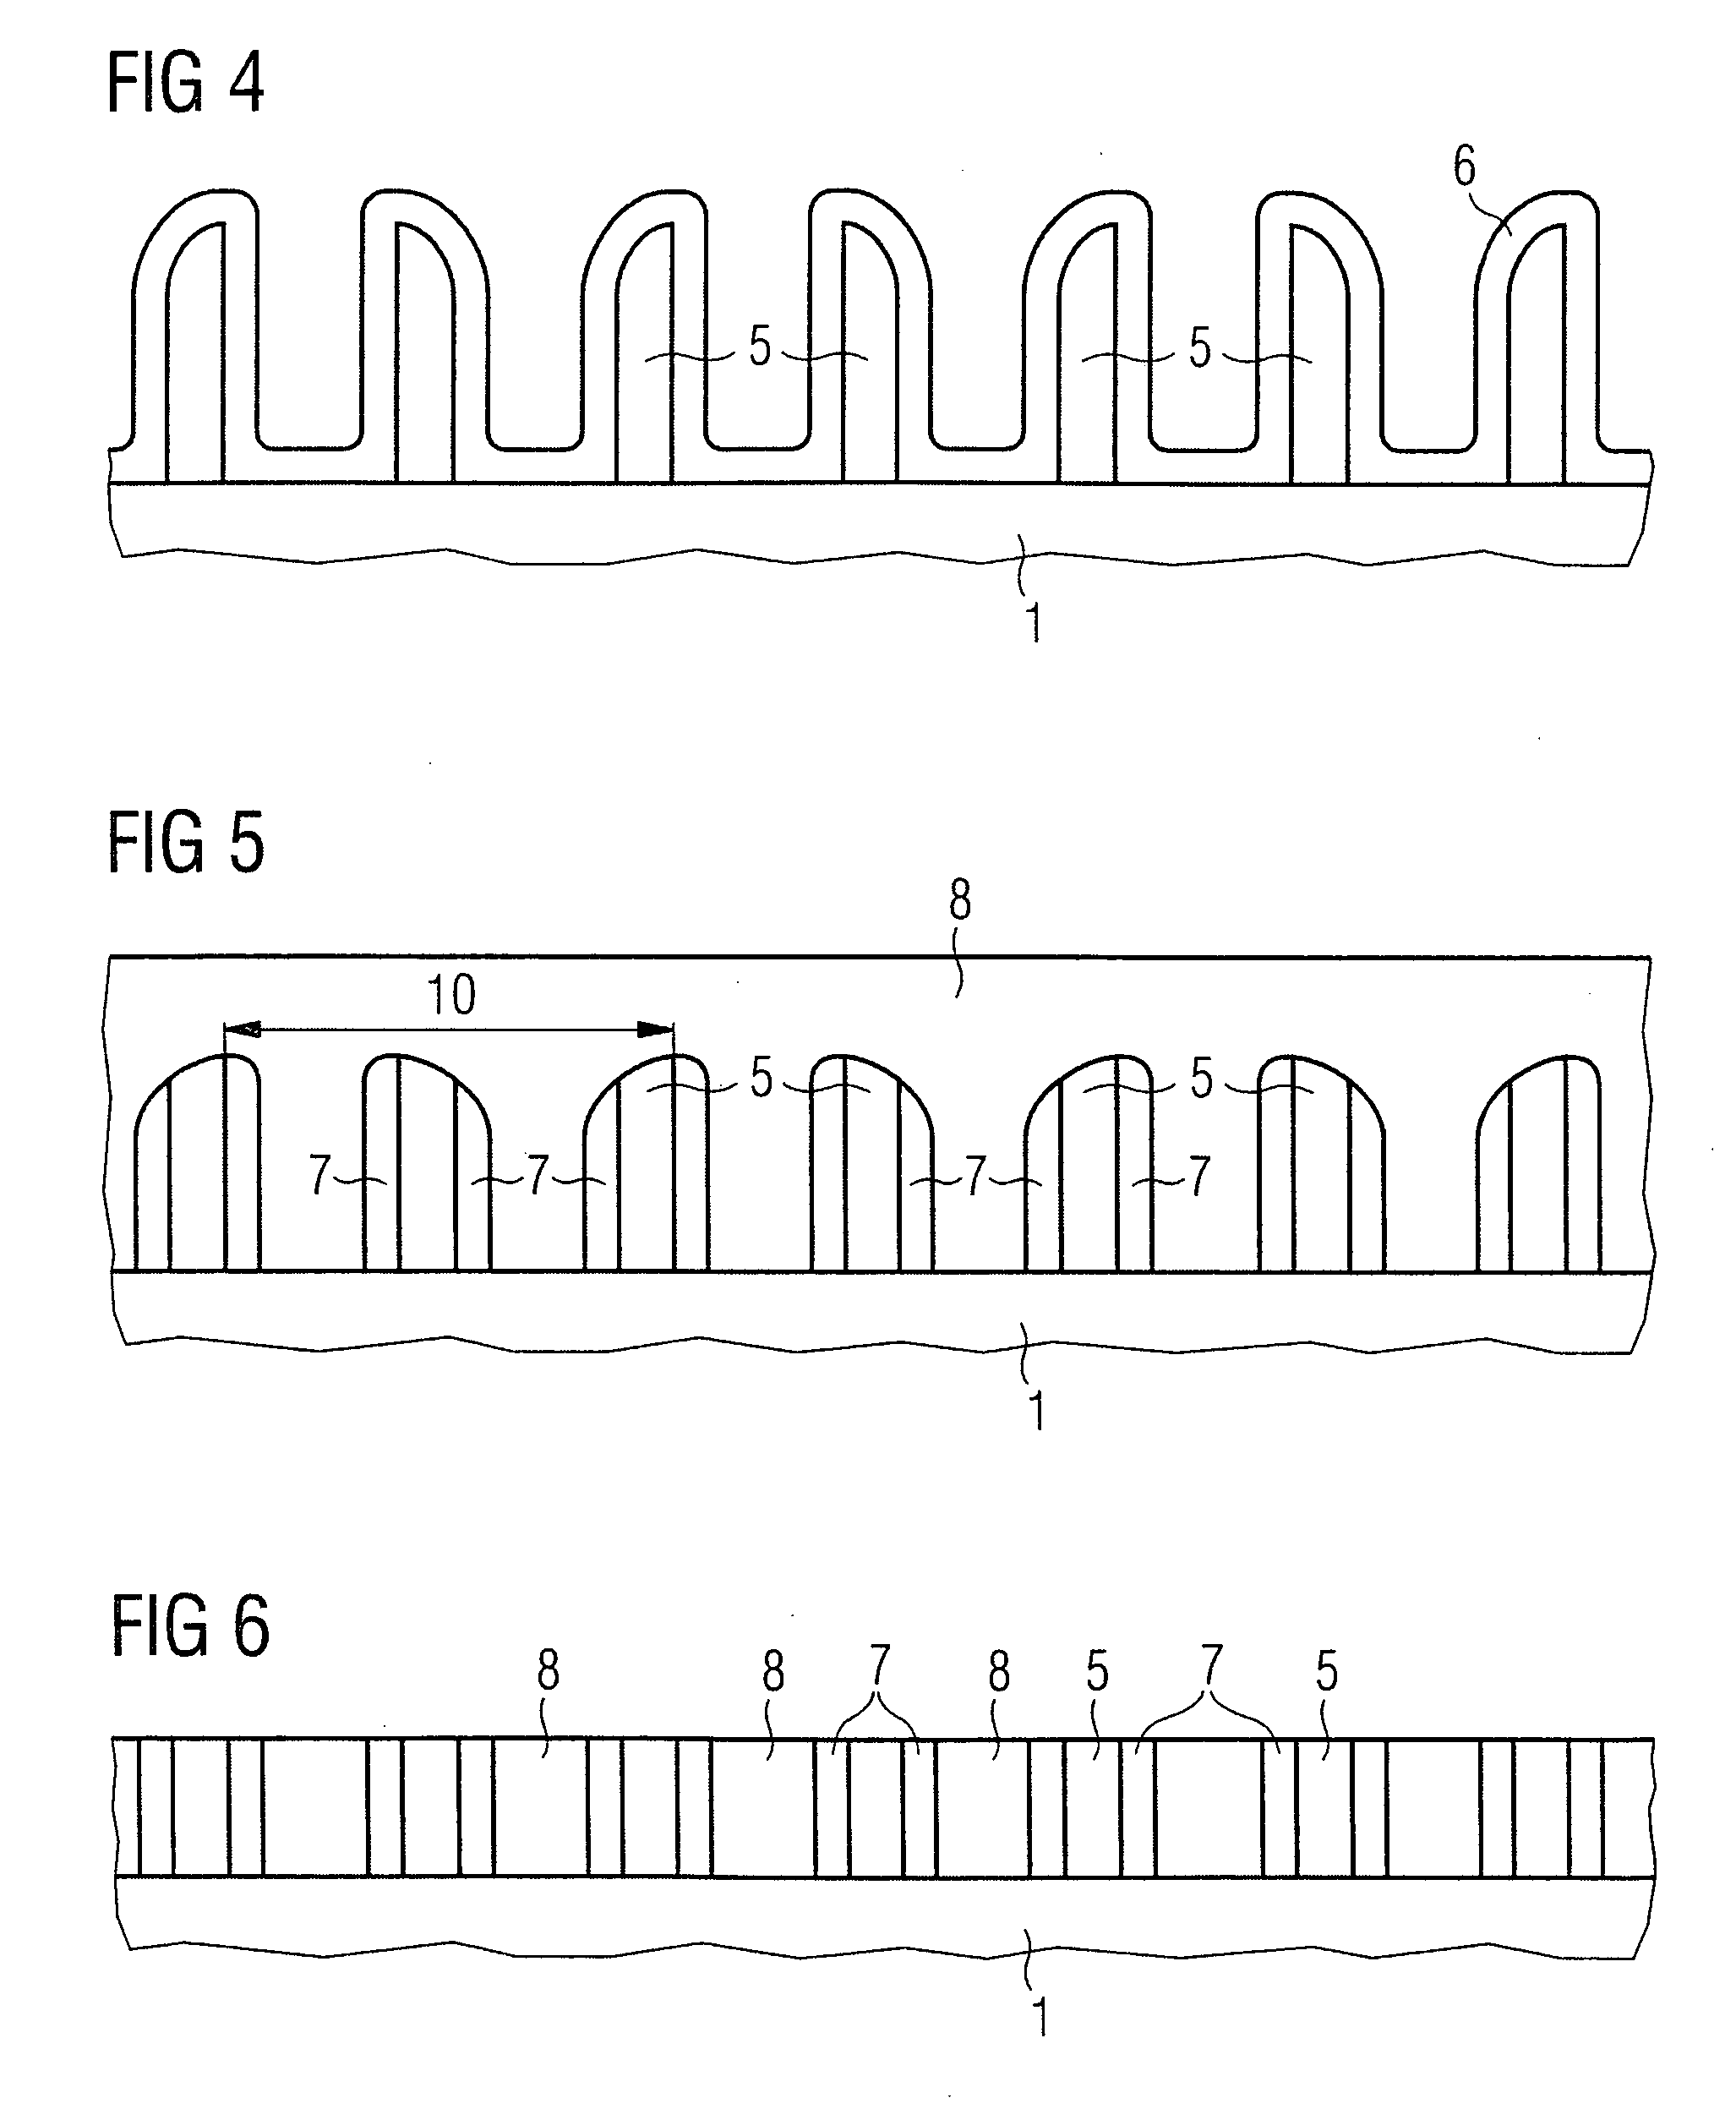 Method of producing pitch fractionizations in semiconductor technology